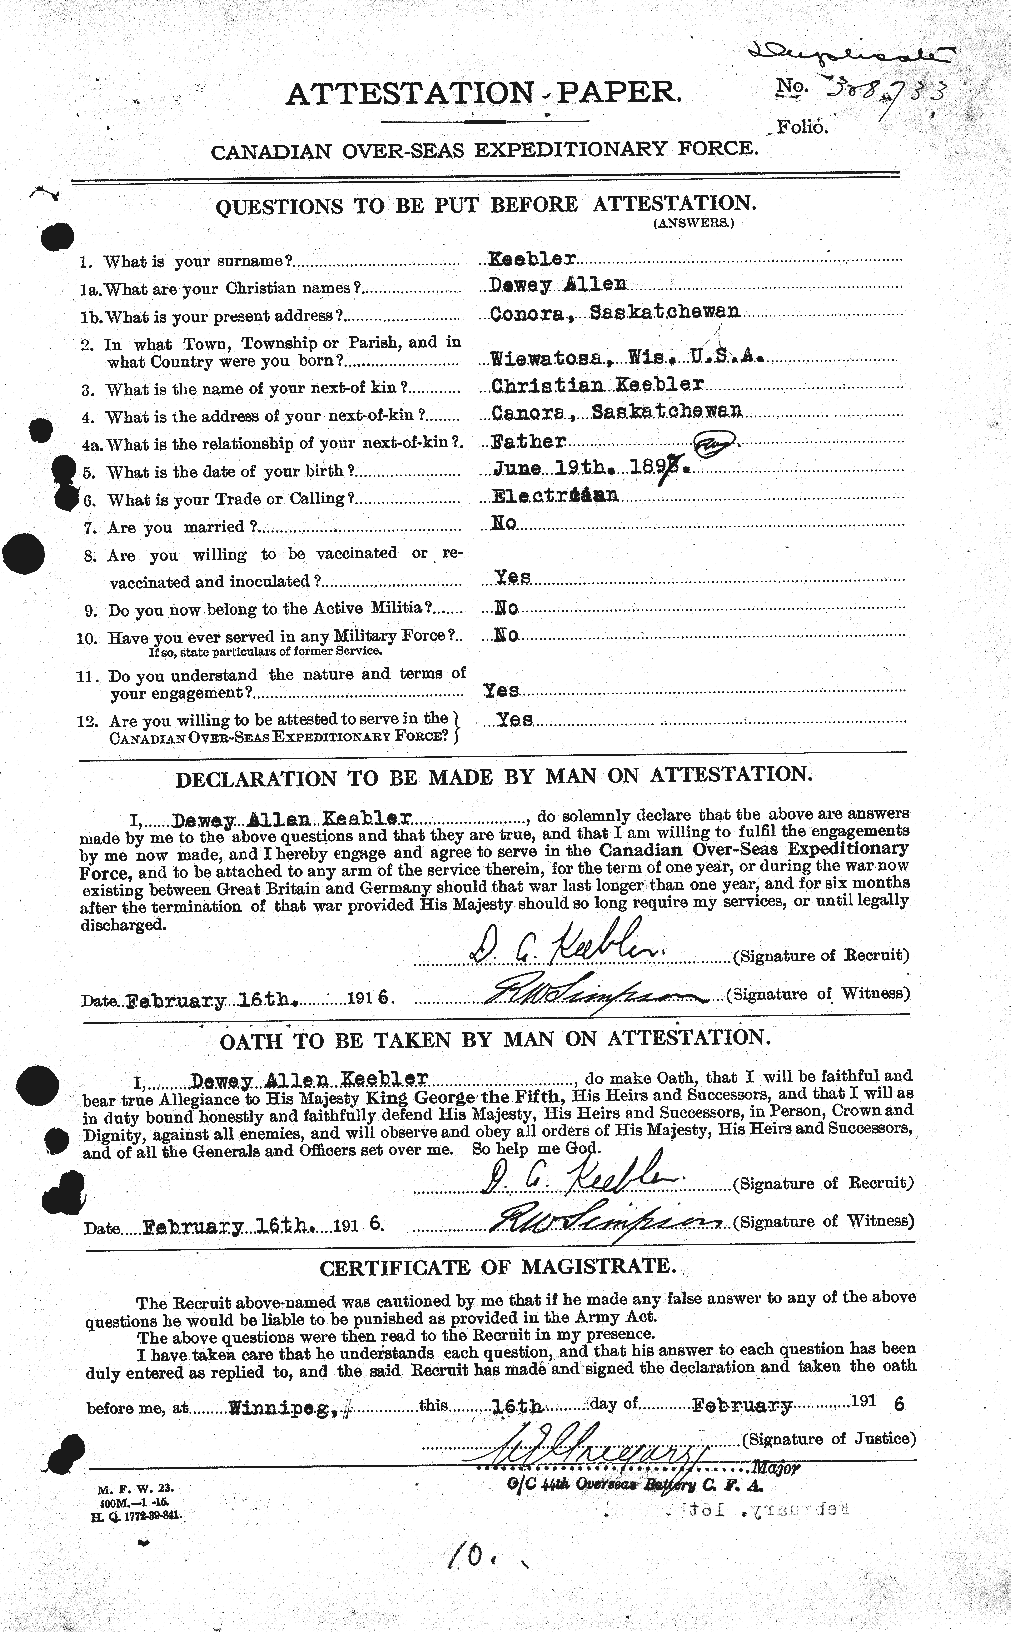 Personnel Records of the First World War - CEF 427663a